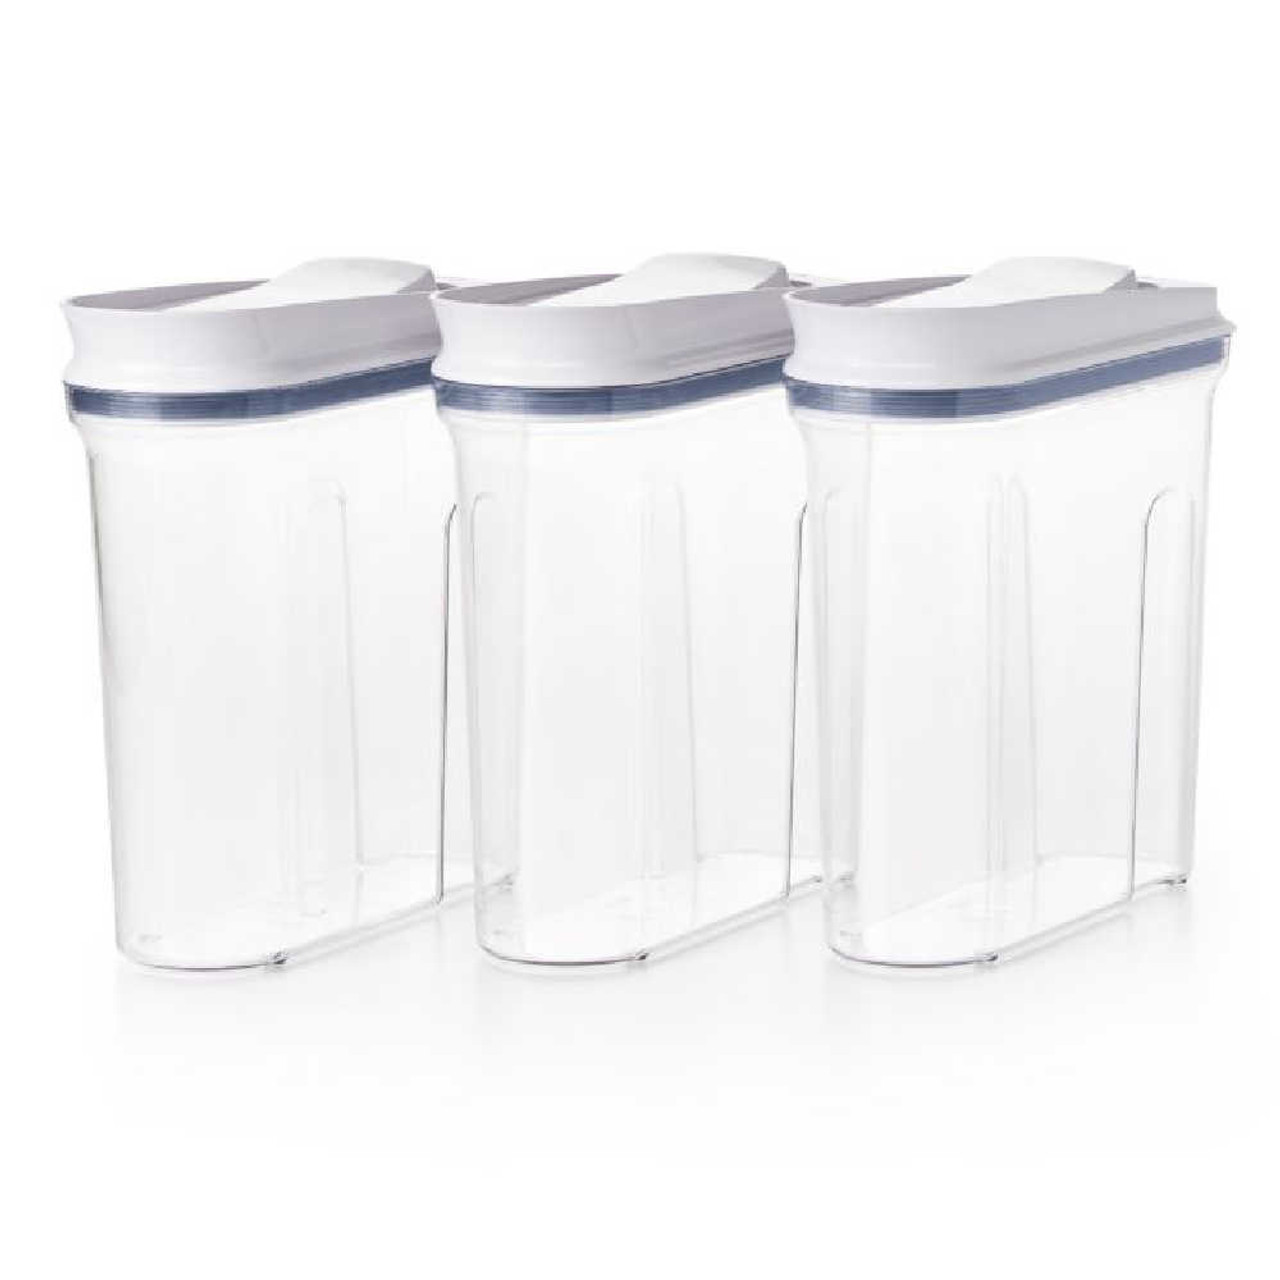 https://cdn11.bigcommerce.com/s-hccytny0od/images/stencil/1280x1280/products/4675/19067/OXO_Good_Grips_3_Piece_POP_Cereal_Dispenser_Set_1__13330.1651615841.jpg?c=2?imbypass=on